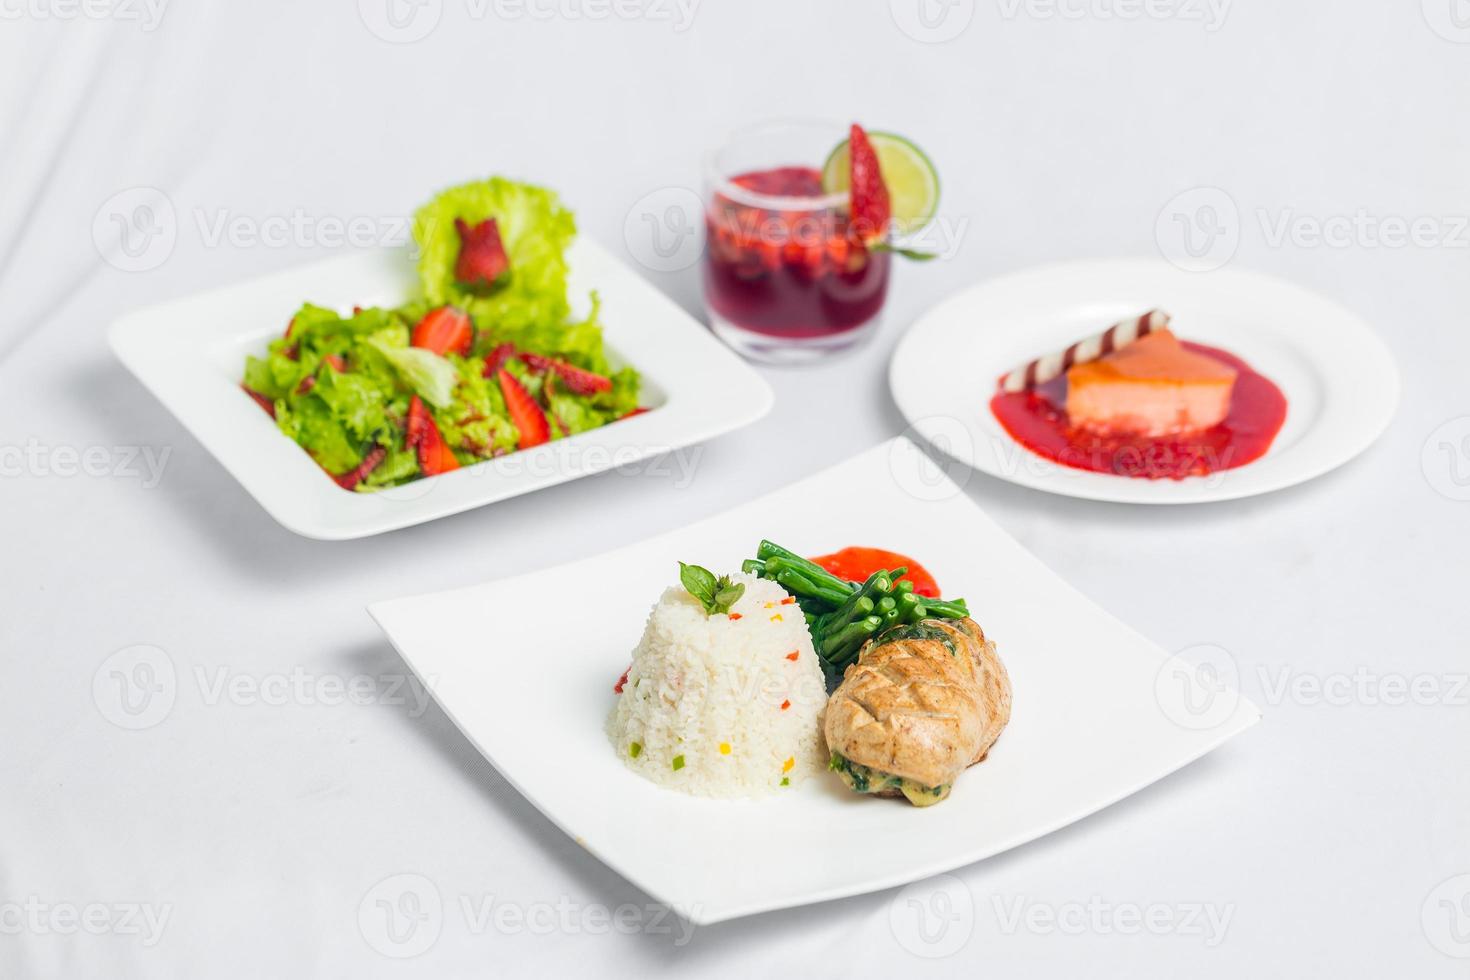 Valentine's day special dinner course food platter on isolated white background. Valentine's meal platter. Valentine's day food offer. photo